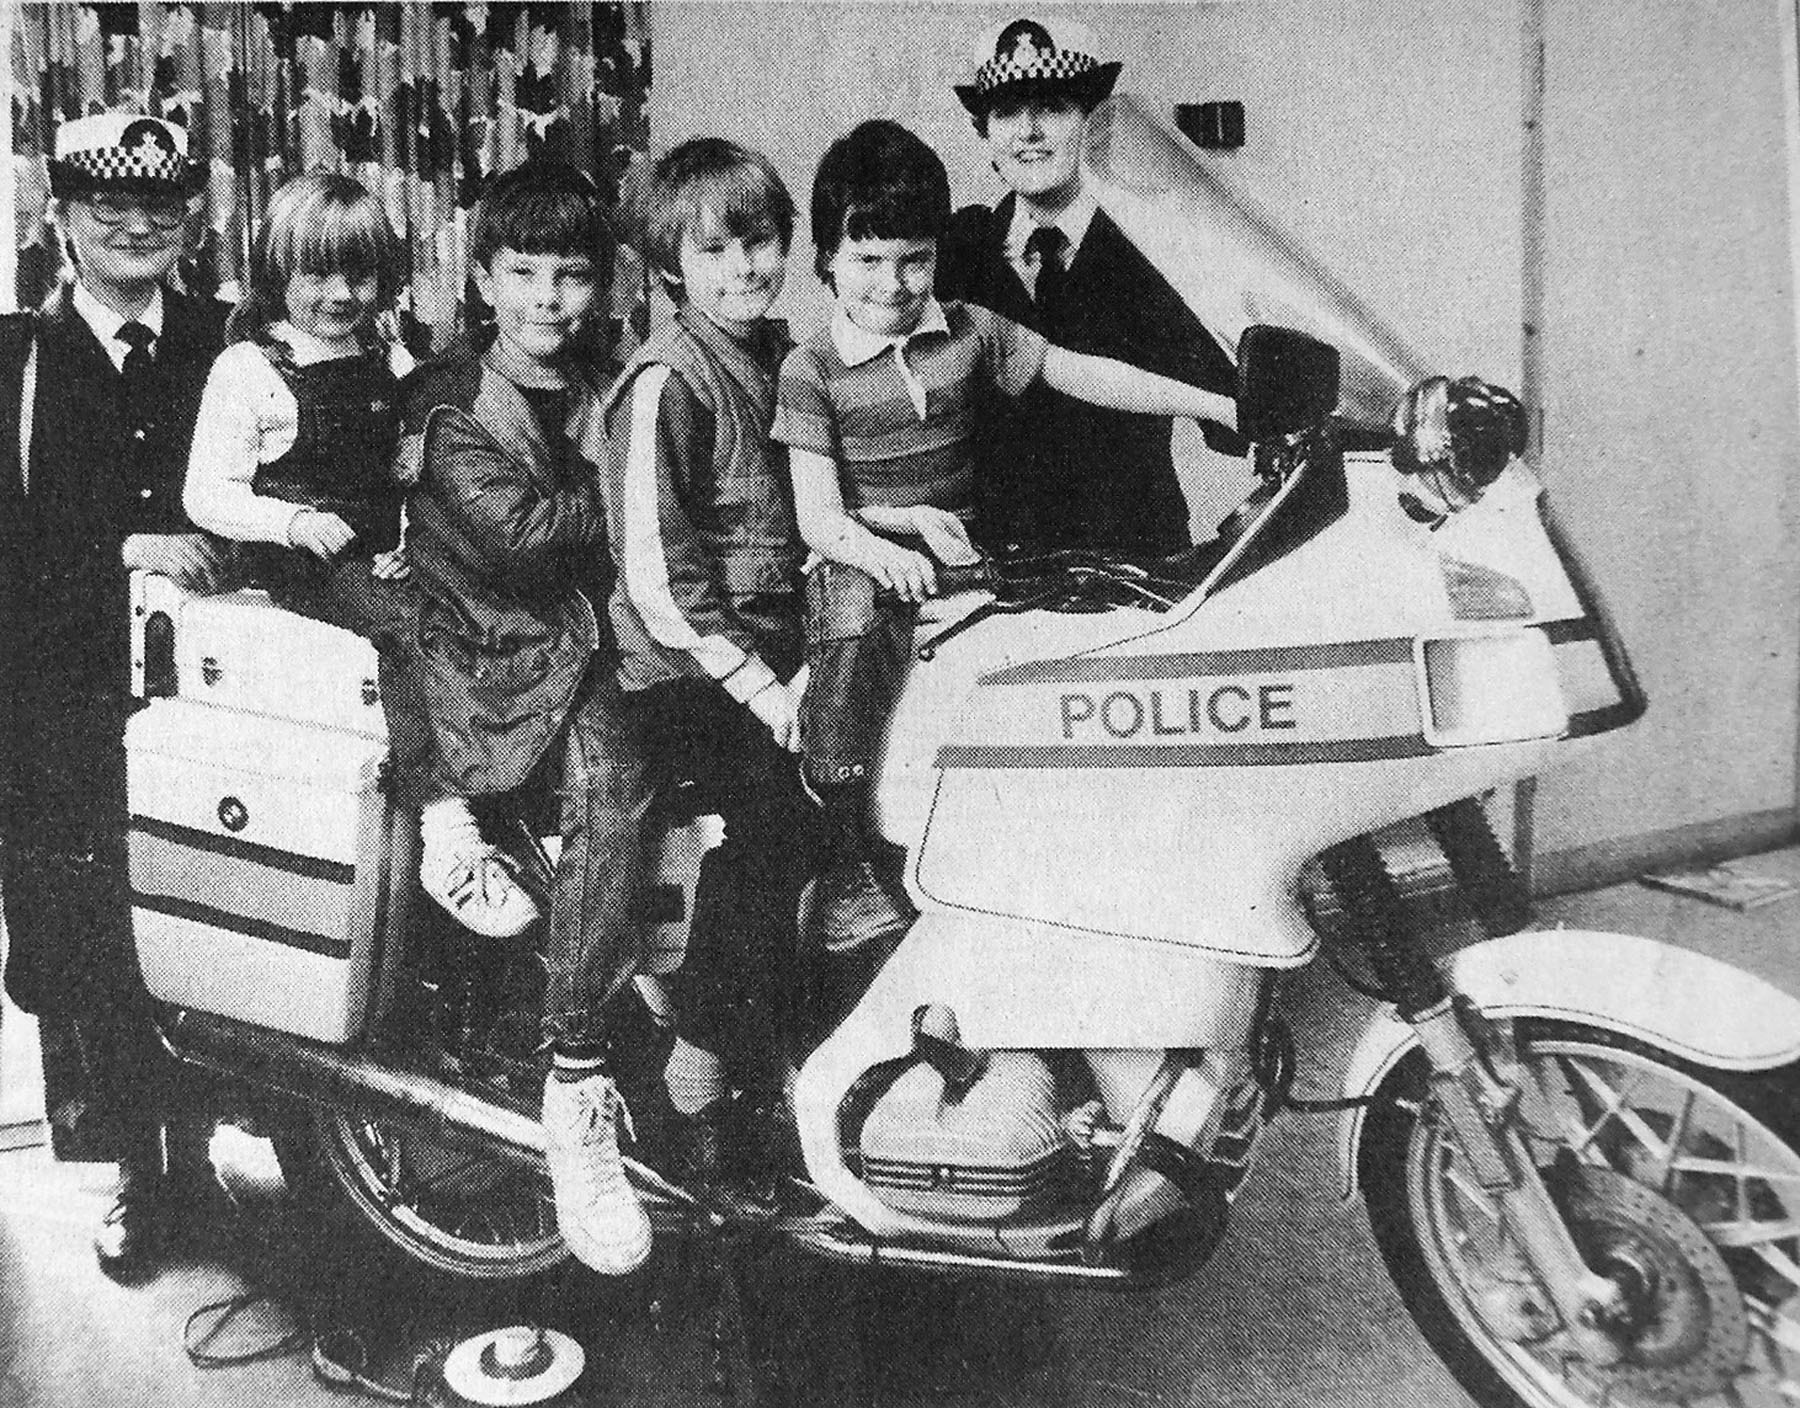 BLUES AND TWOS: A police motorcycle visited a playgroup